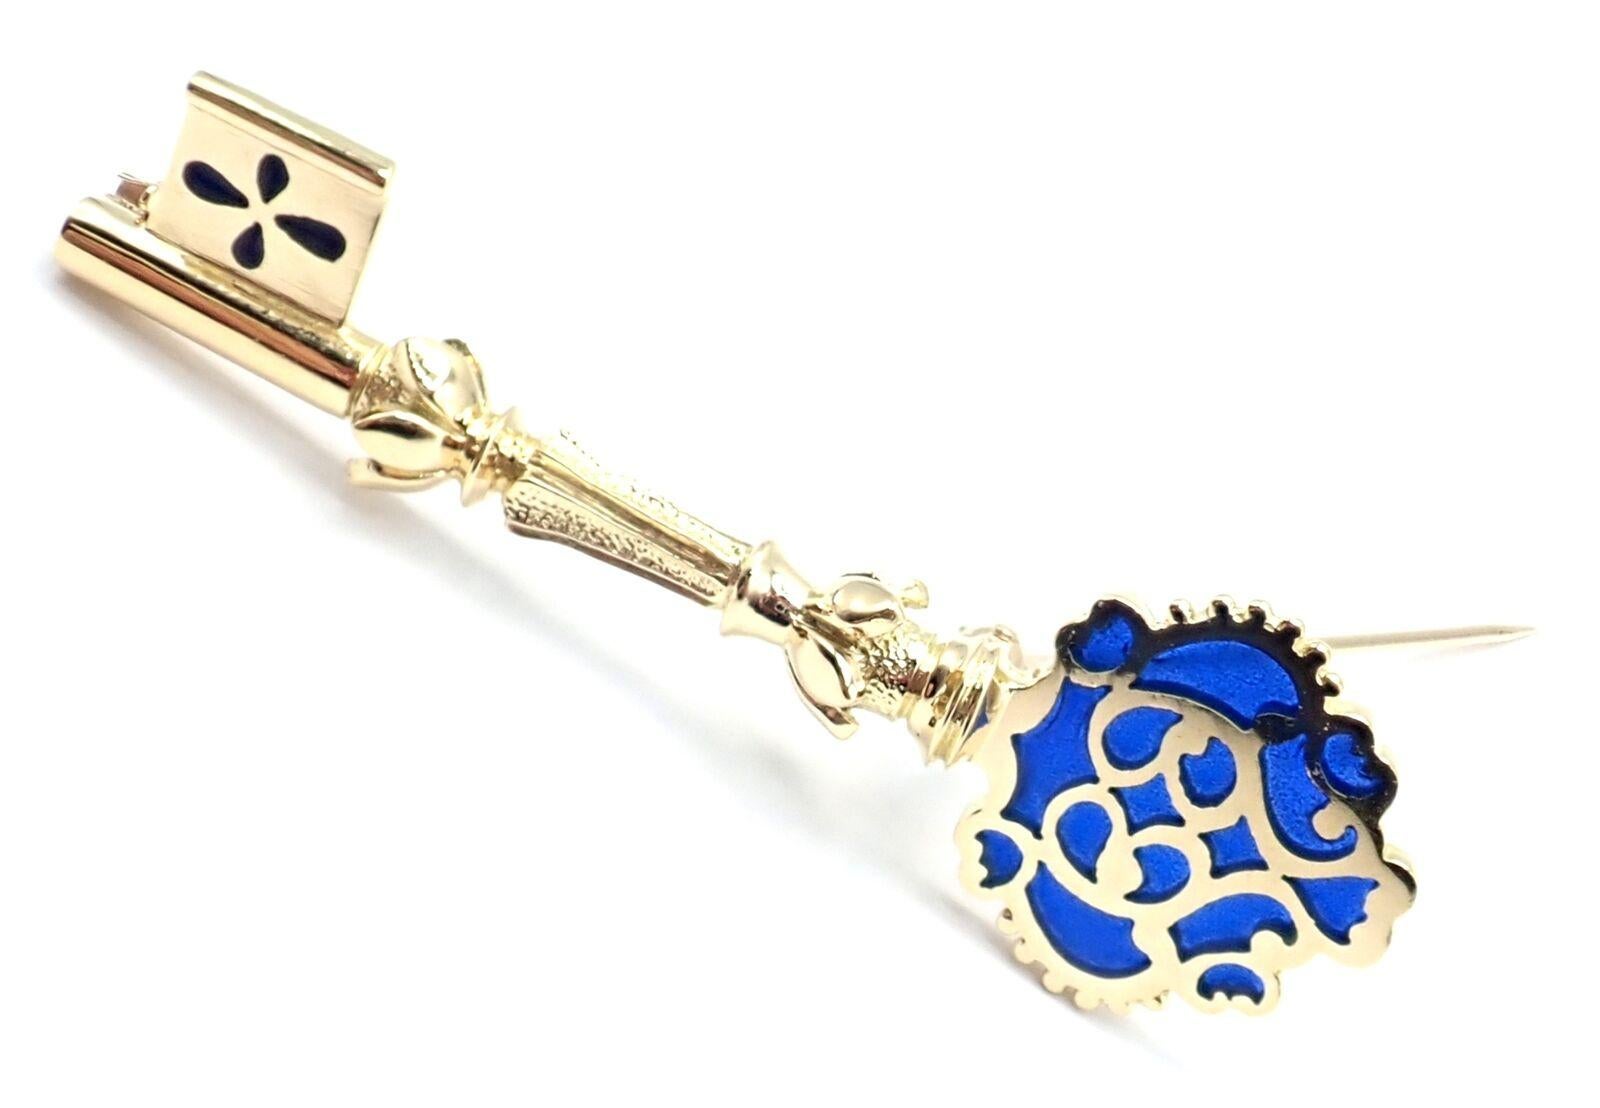 18k Yellow Gold Vintage Blue Enamel Key Pin Brooch by Mikimoto. 
With Blue Enamel.
Details: 
Measurements: 52mm x 18mm
Weight: 8.9 grams
Stamped Hallmarks: 18k Mikimoto Hallmark - M 
*Free Shipping within the United States*
YOUR PRICE: